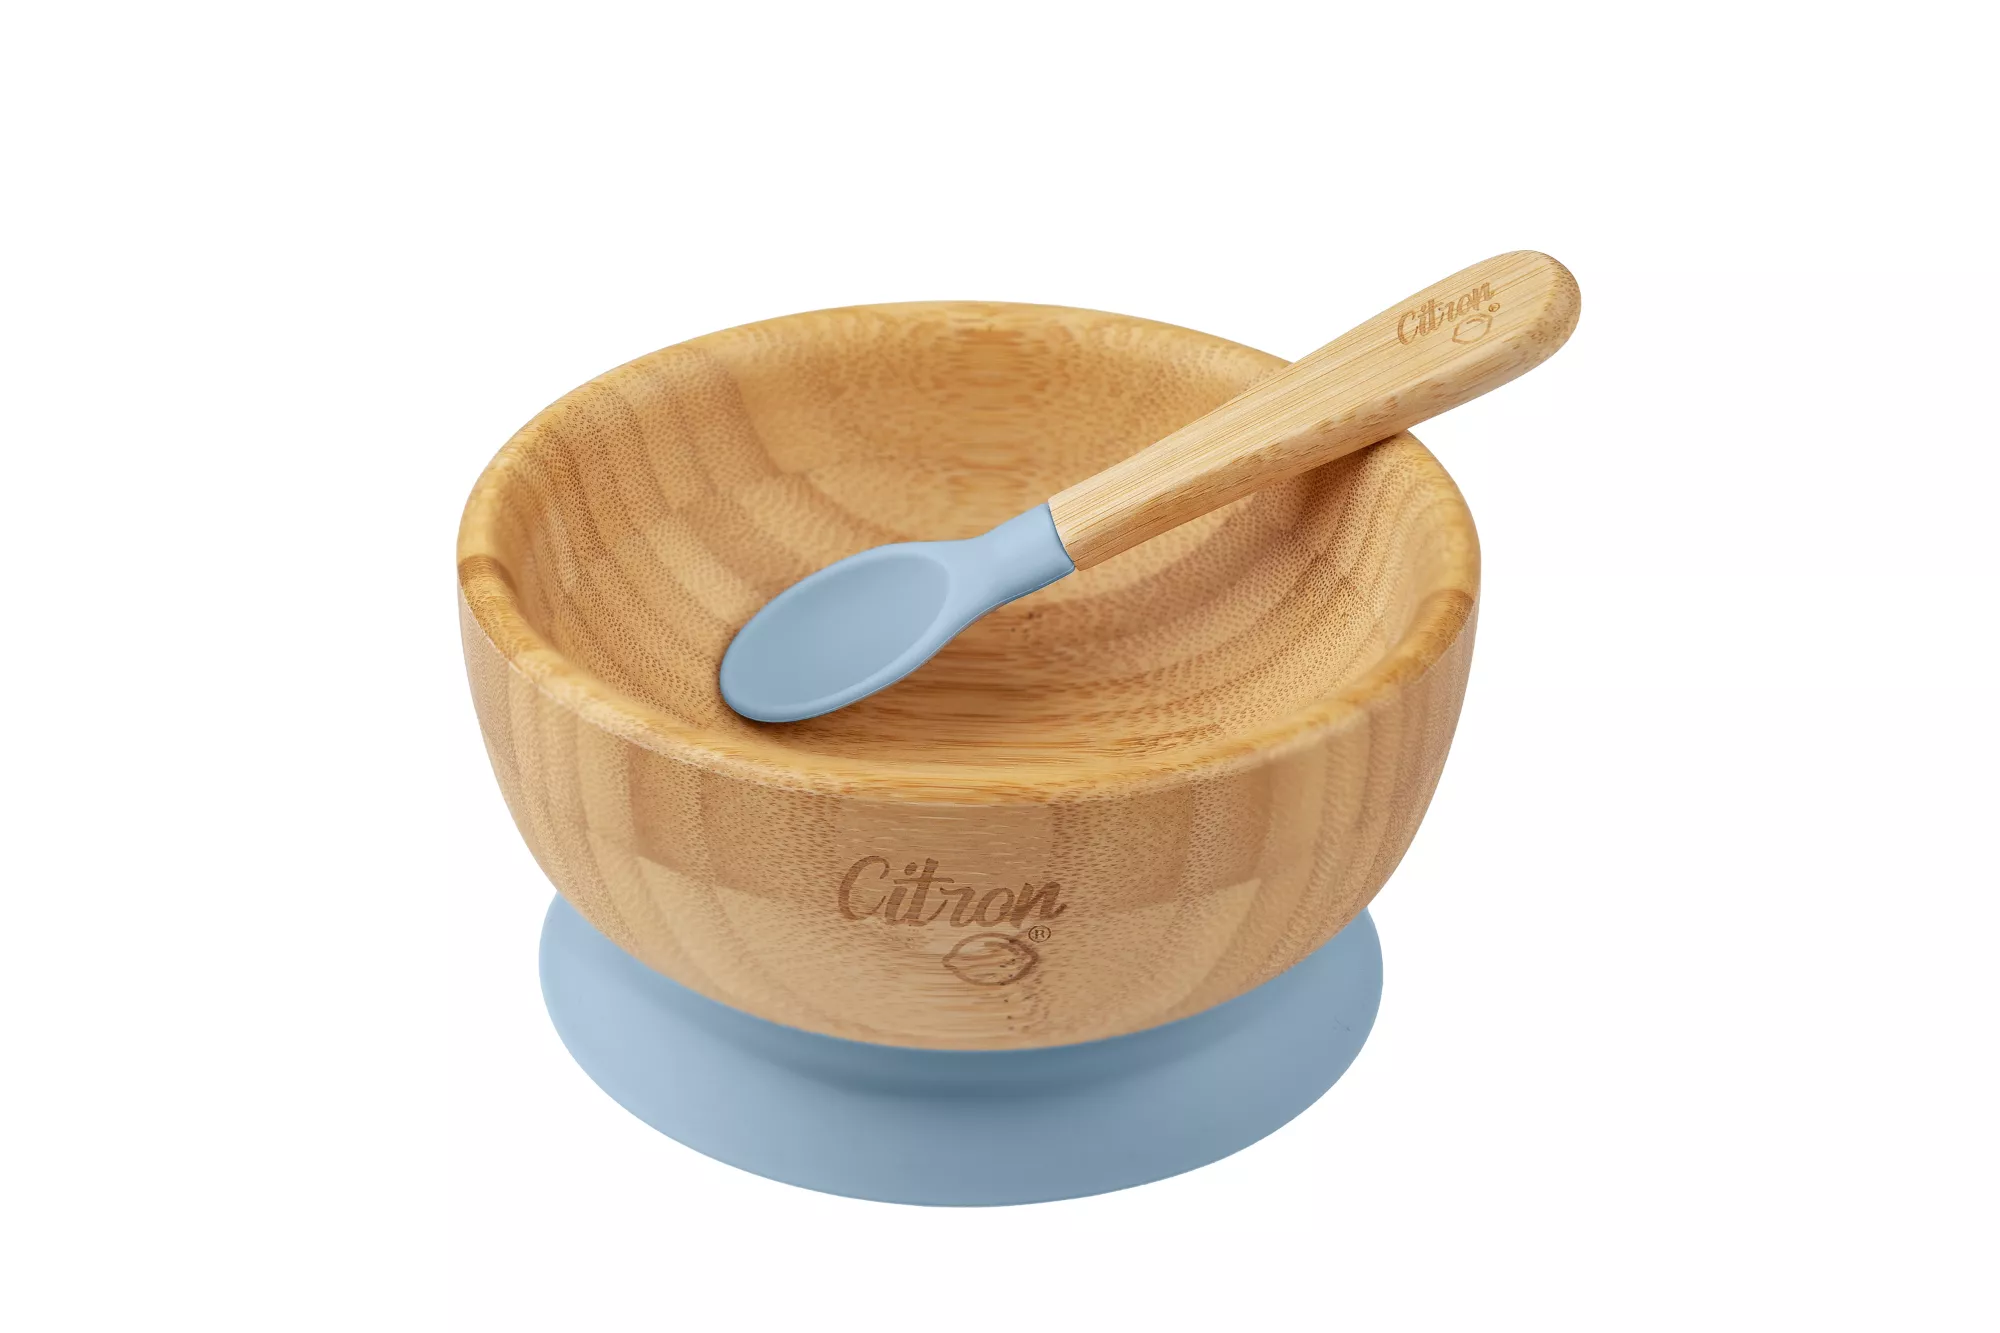 Citron Organic Bamboo 350 ML Suction Bowl and Spoon